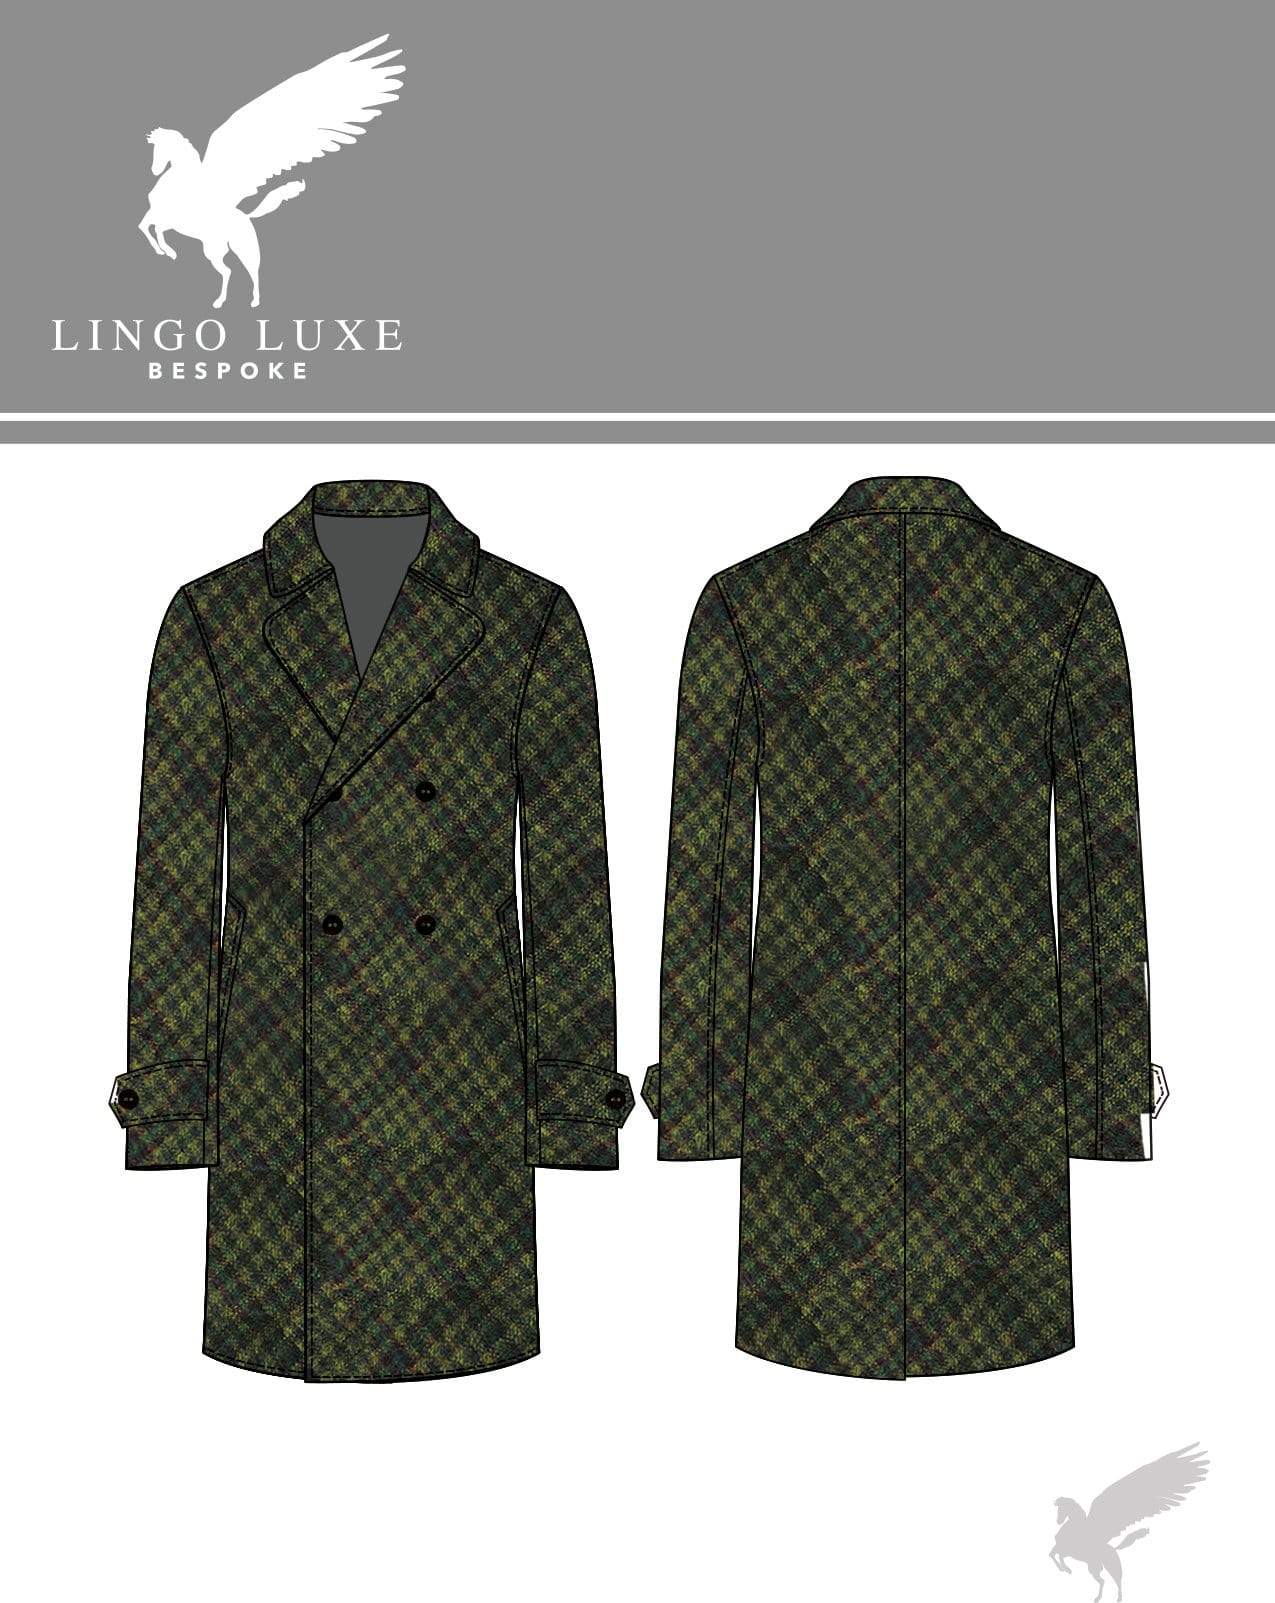 Outerwear | Lingo Luxe The Stately Overcoat | Mossland-Lingo Luxe Bespoke